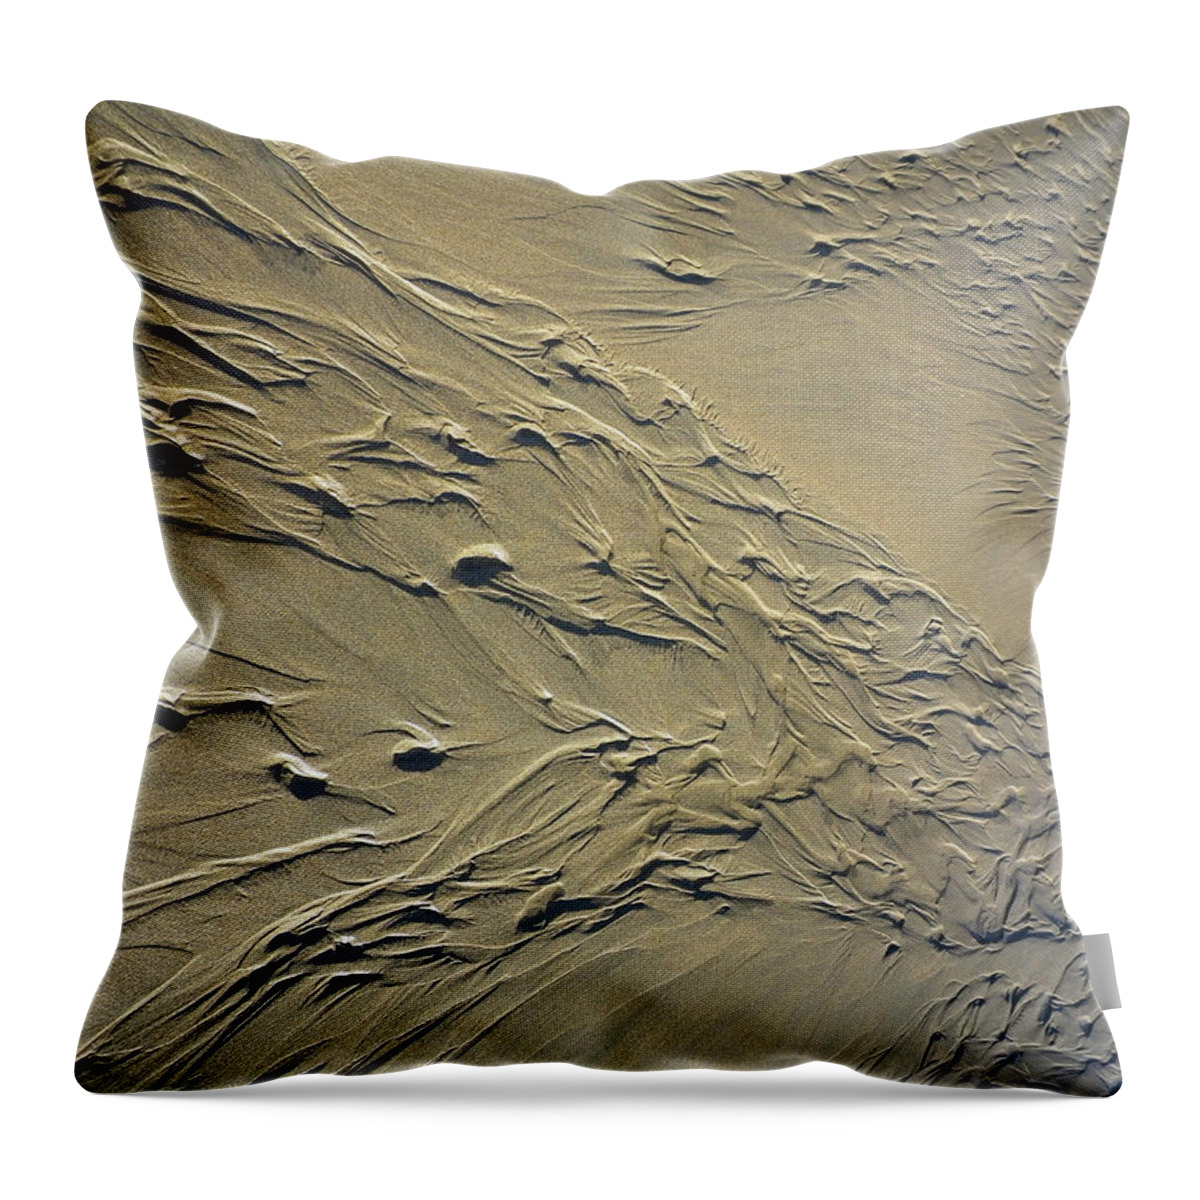 Sand Throw Pillow featuring the photograph Streaming Beach Sand Ripples Abstract by Richard Brookes